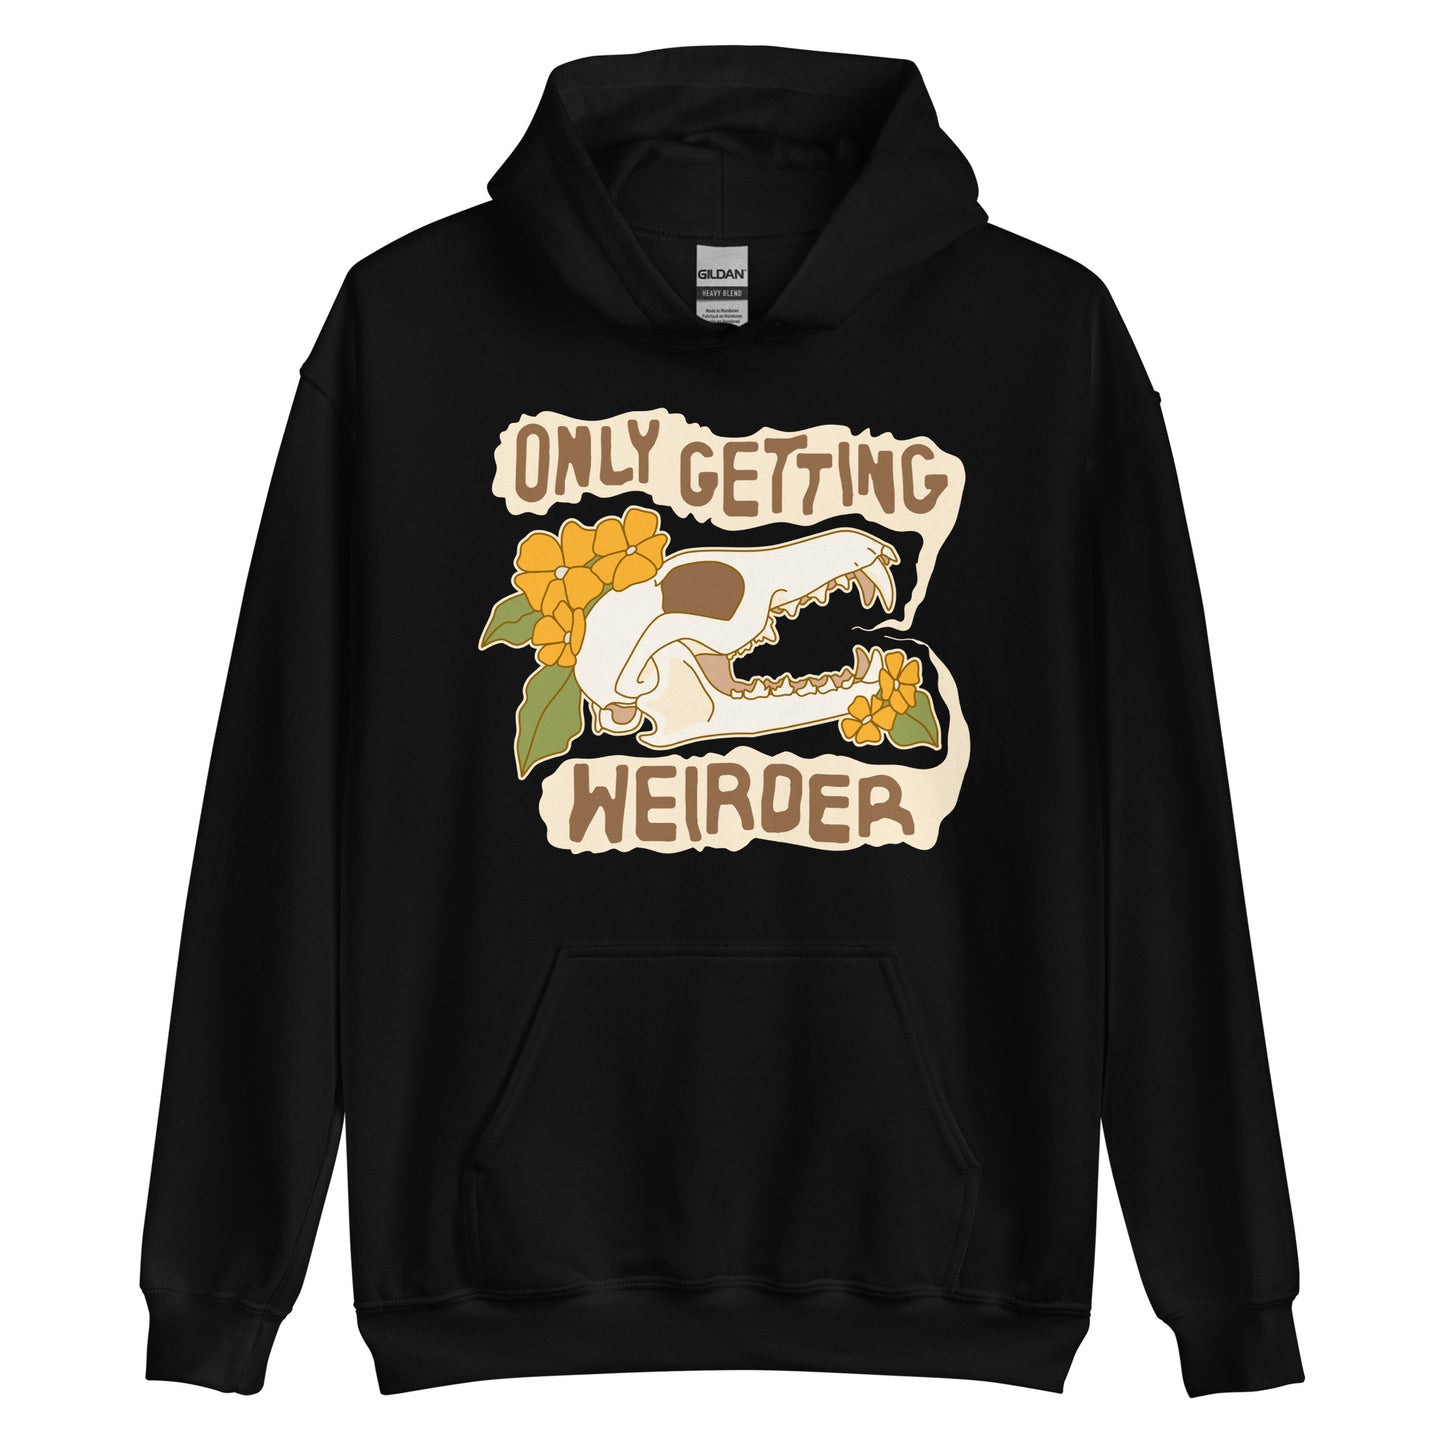 A black hooded sweatshirt featuring an illustration of a fox skull surrounded by yellow flowers. Wobbly speech bubbles are coming from the fox's mouth. The text inside the bubbles reads "ONLY GETTING WEIRDER".